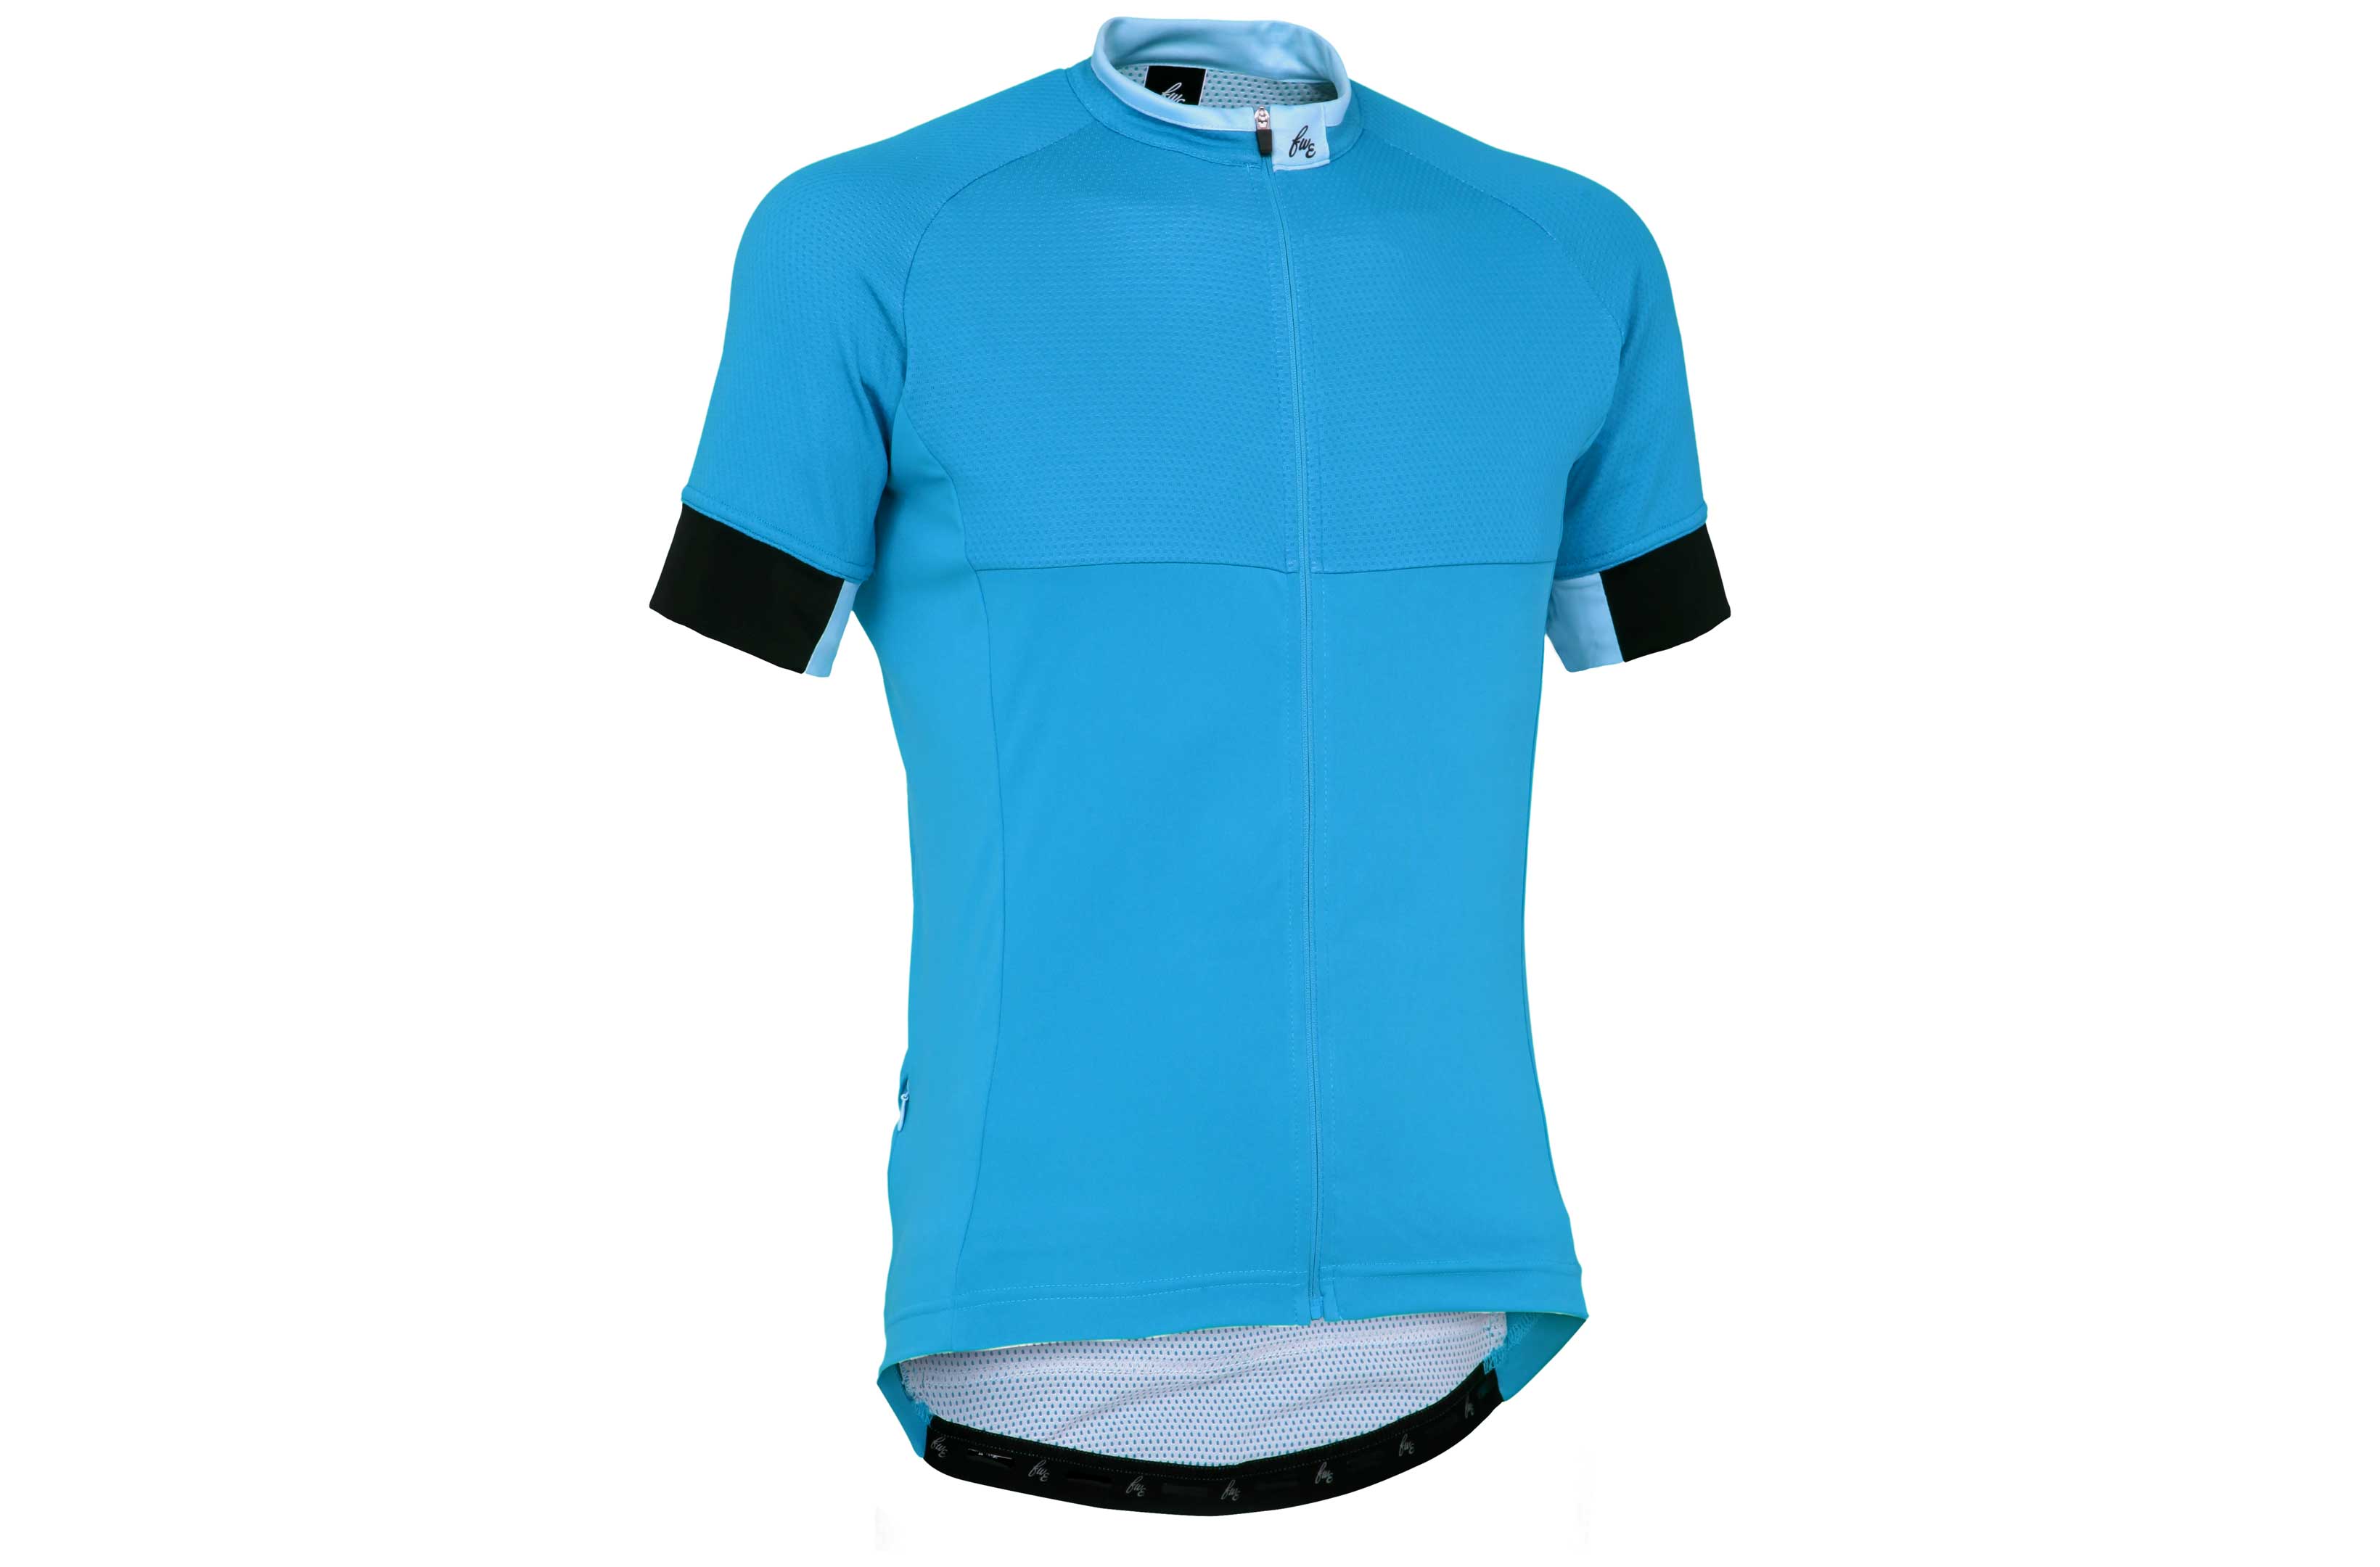 evans cycling jersey